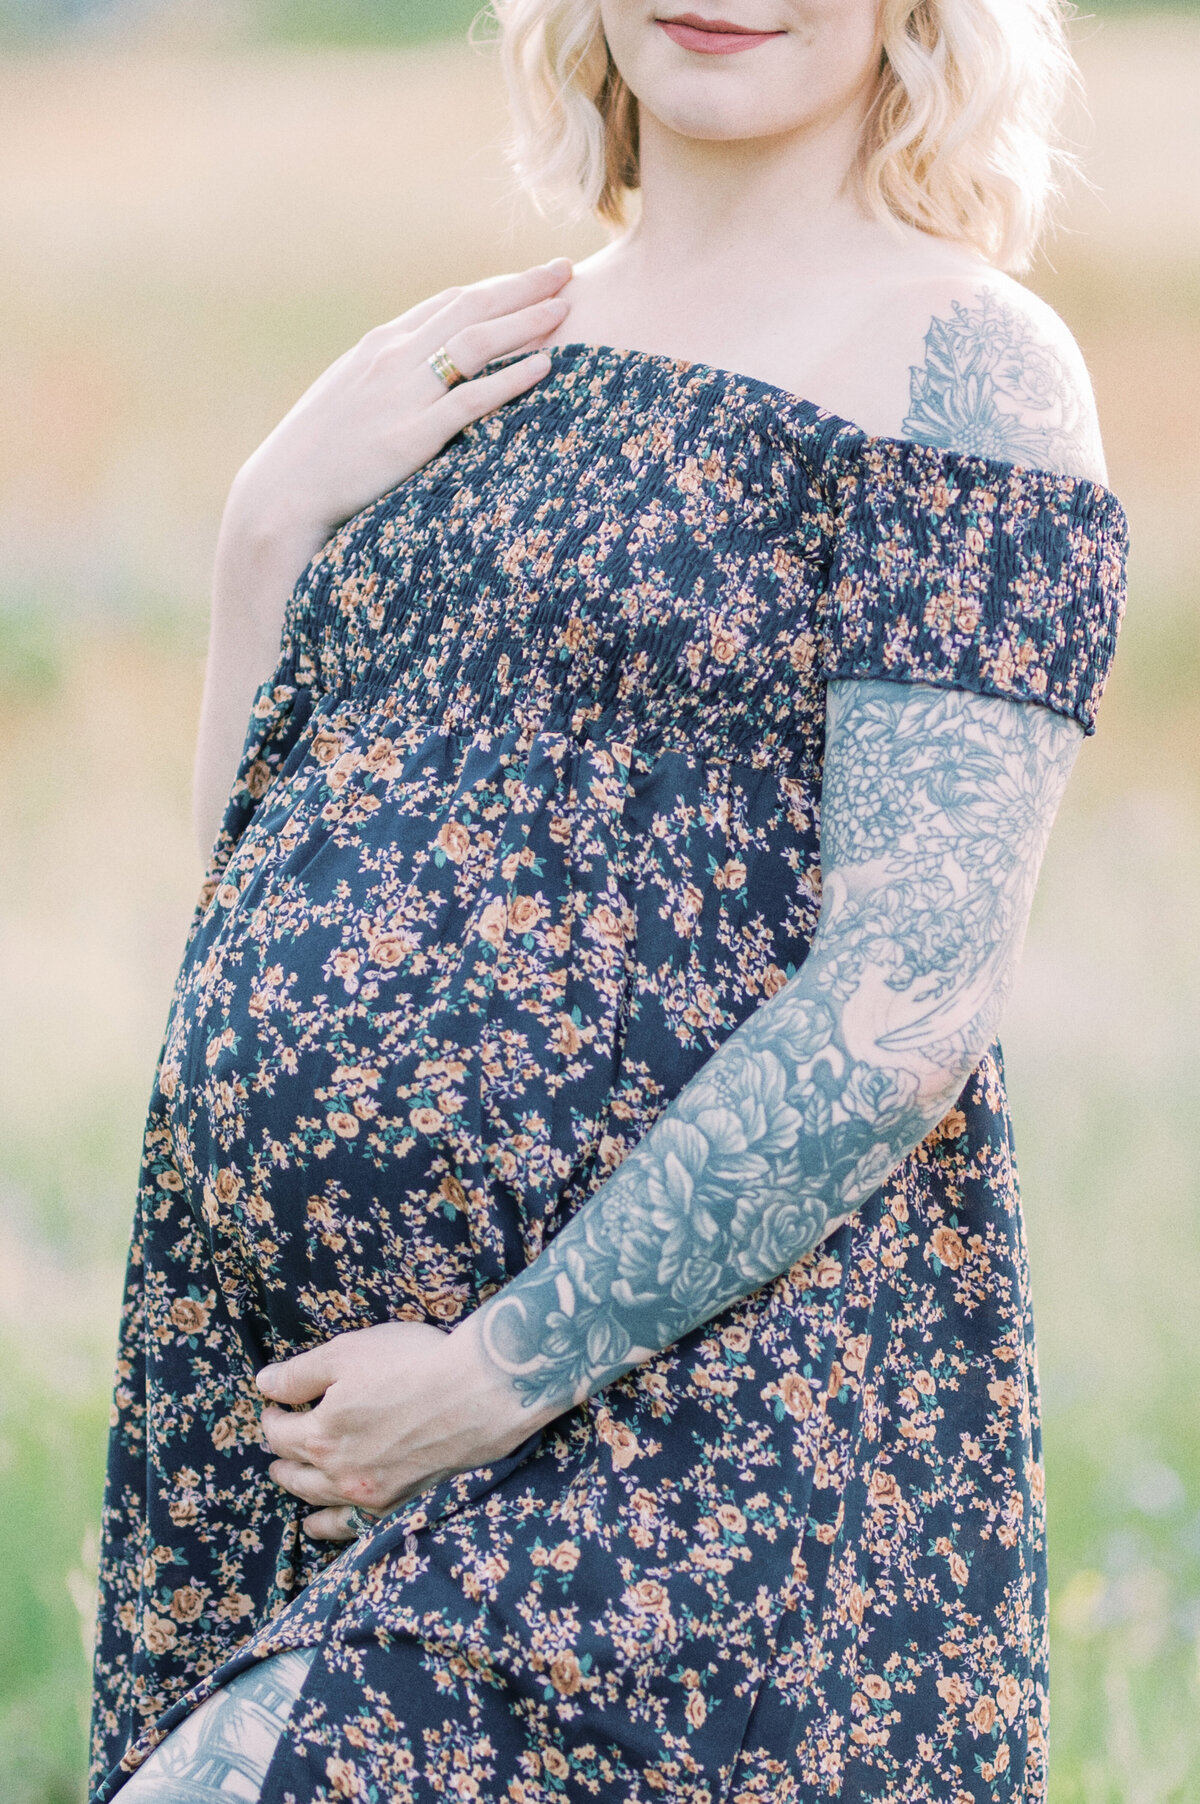 Maternity in dark floral dress with son-1-3